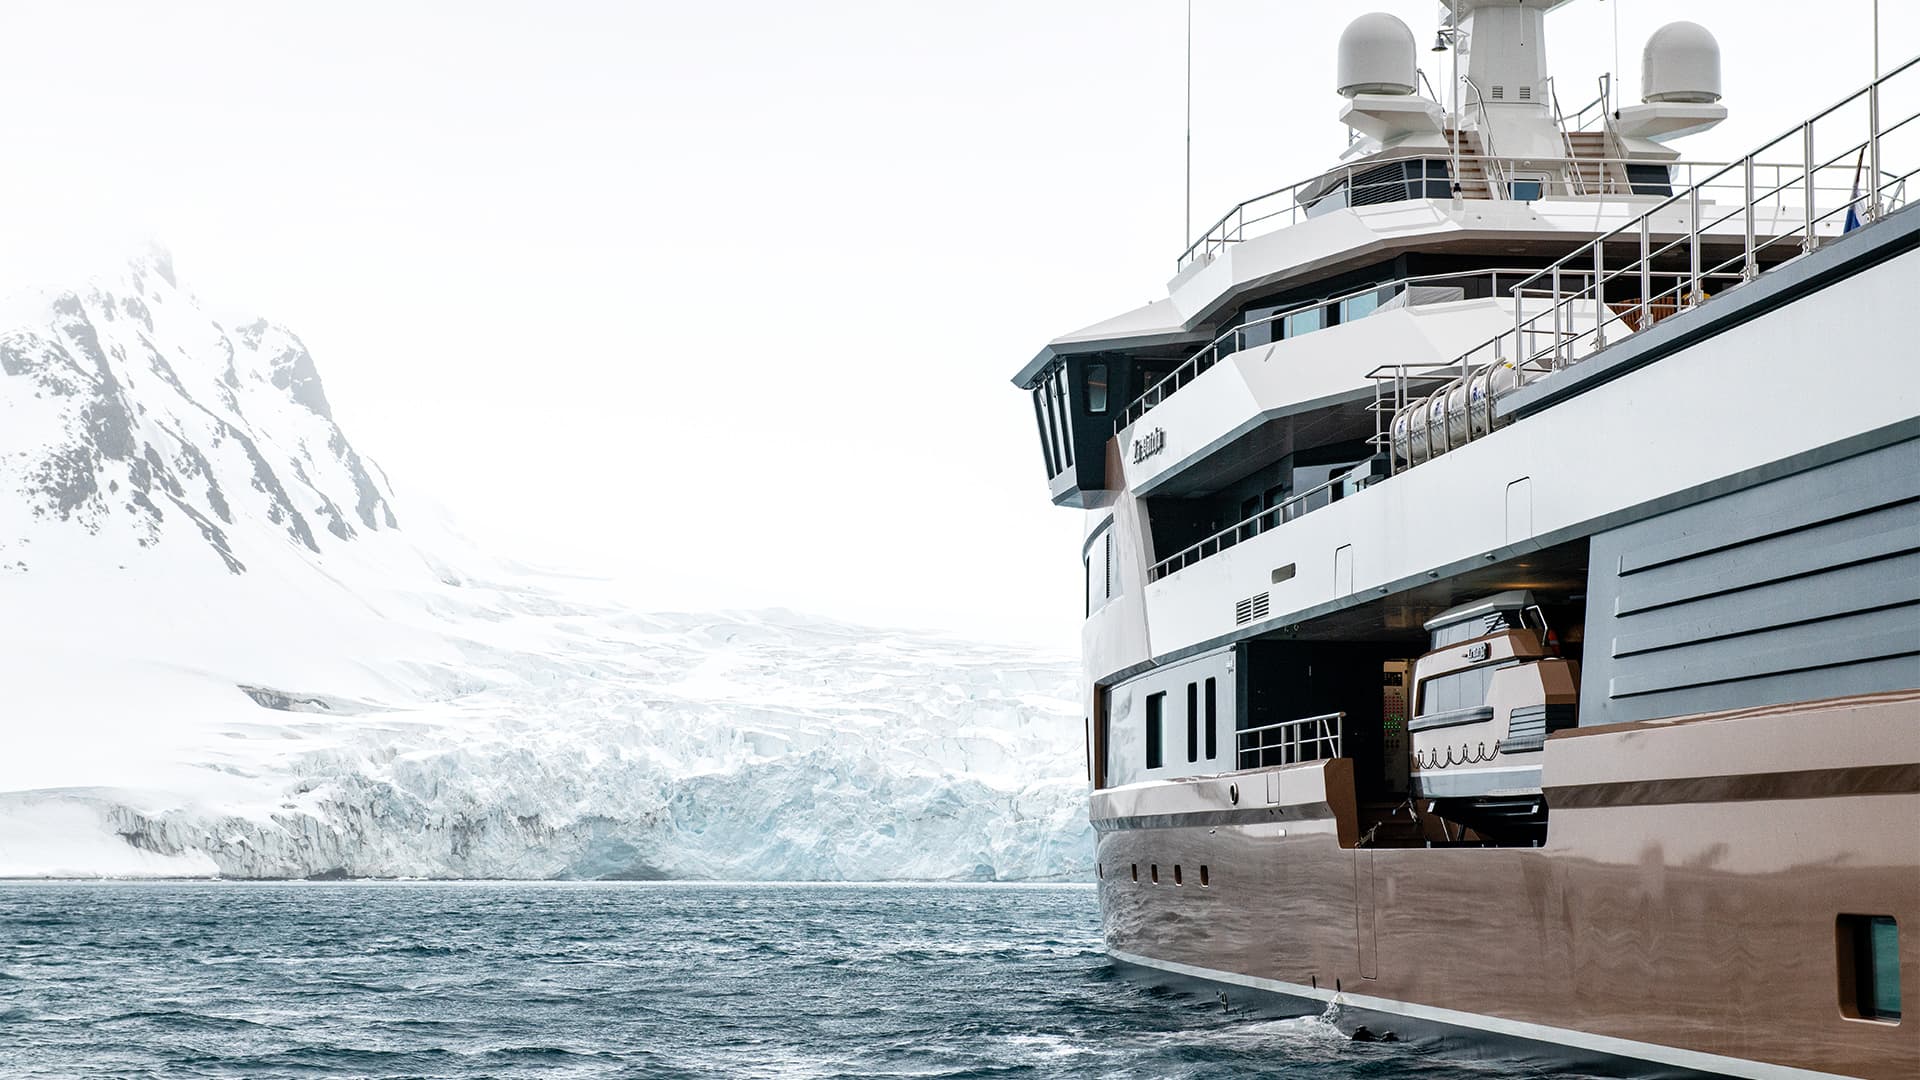 expedition yachts